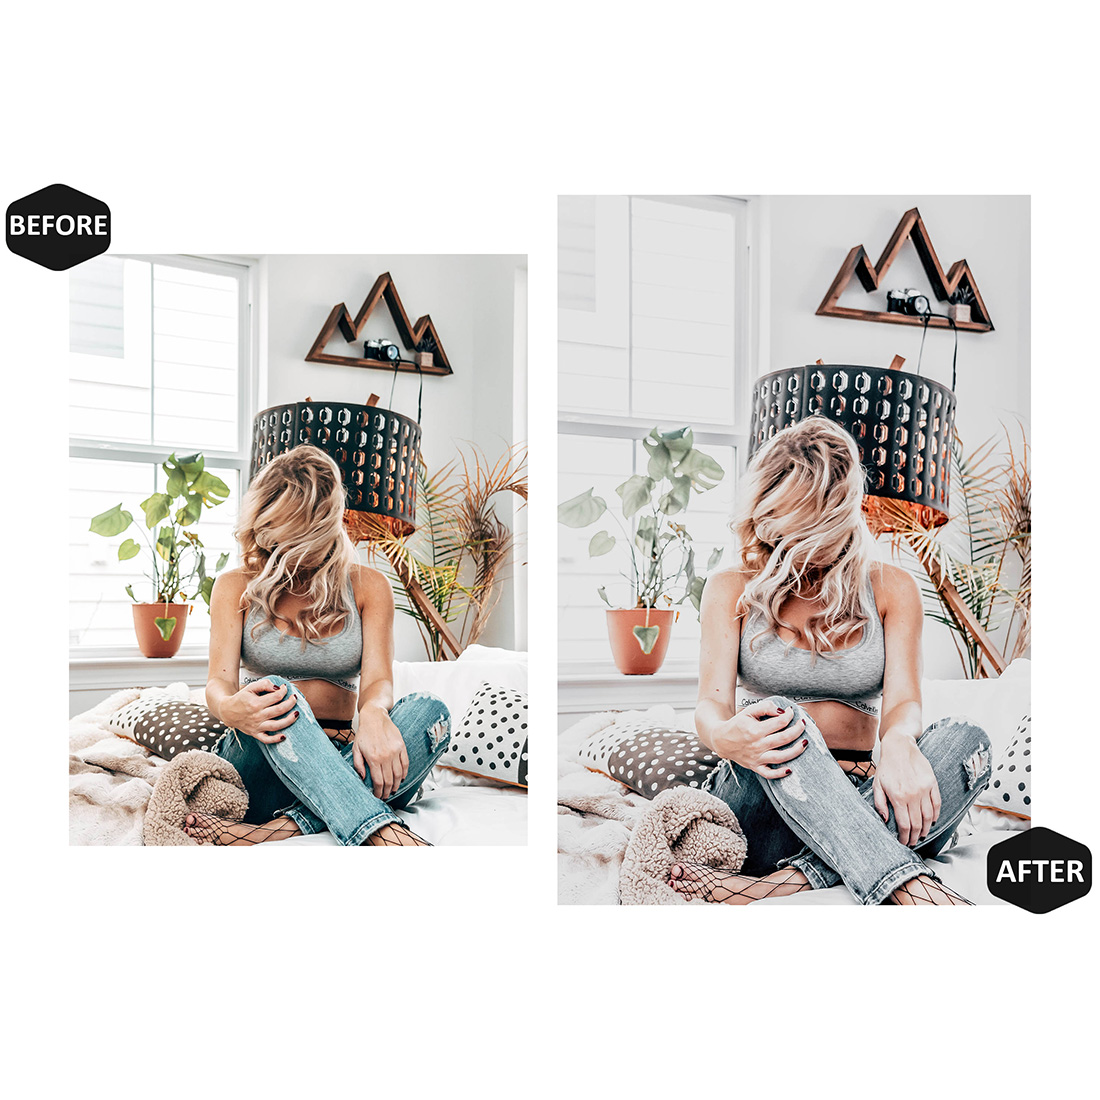 12 Photoshop Actions, Chic Ivory Ps Action, Bright ACR Preset, Bohemian Ps Filter, Atn Portrait And Lifestyle Theme For Instagram, Blogger preview image.